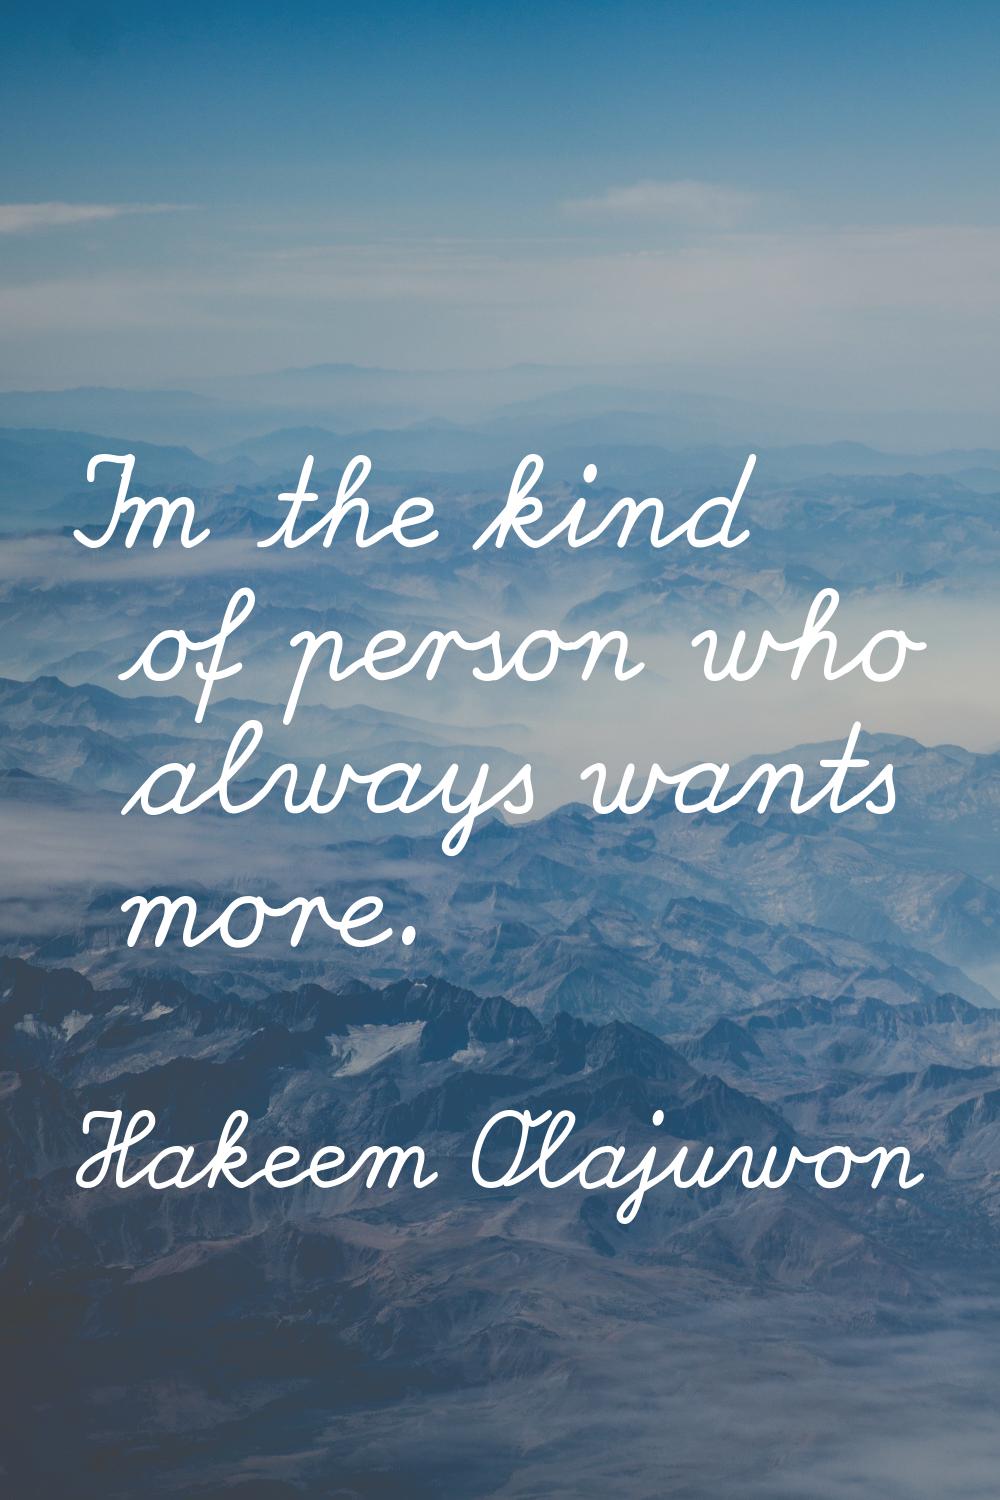 I'm the kind of person who always wants more.